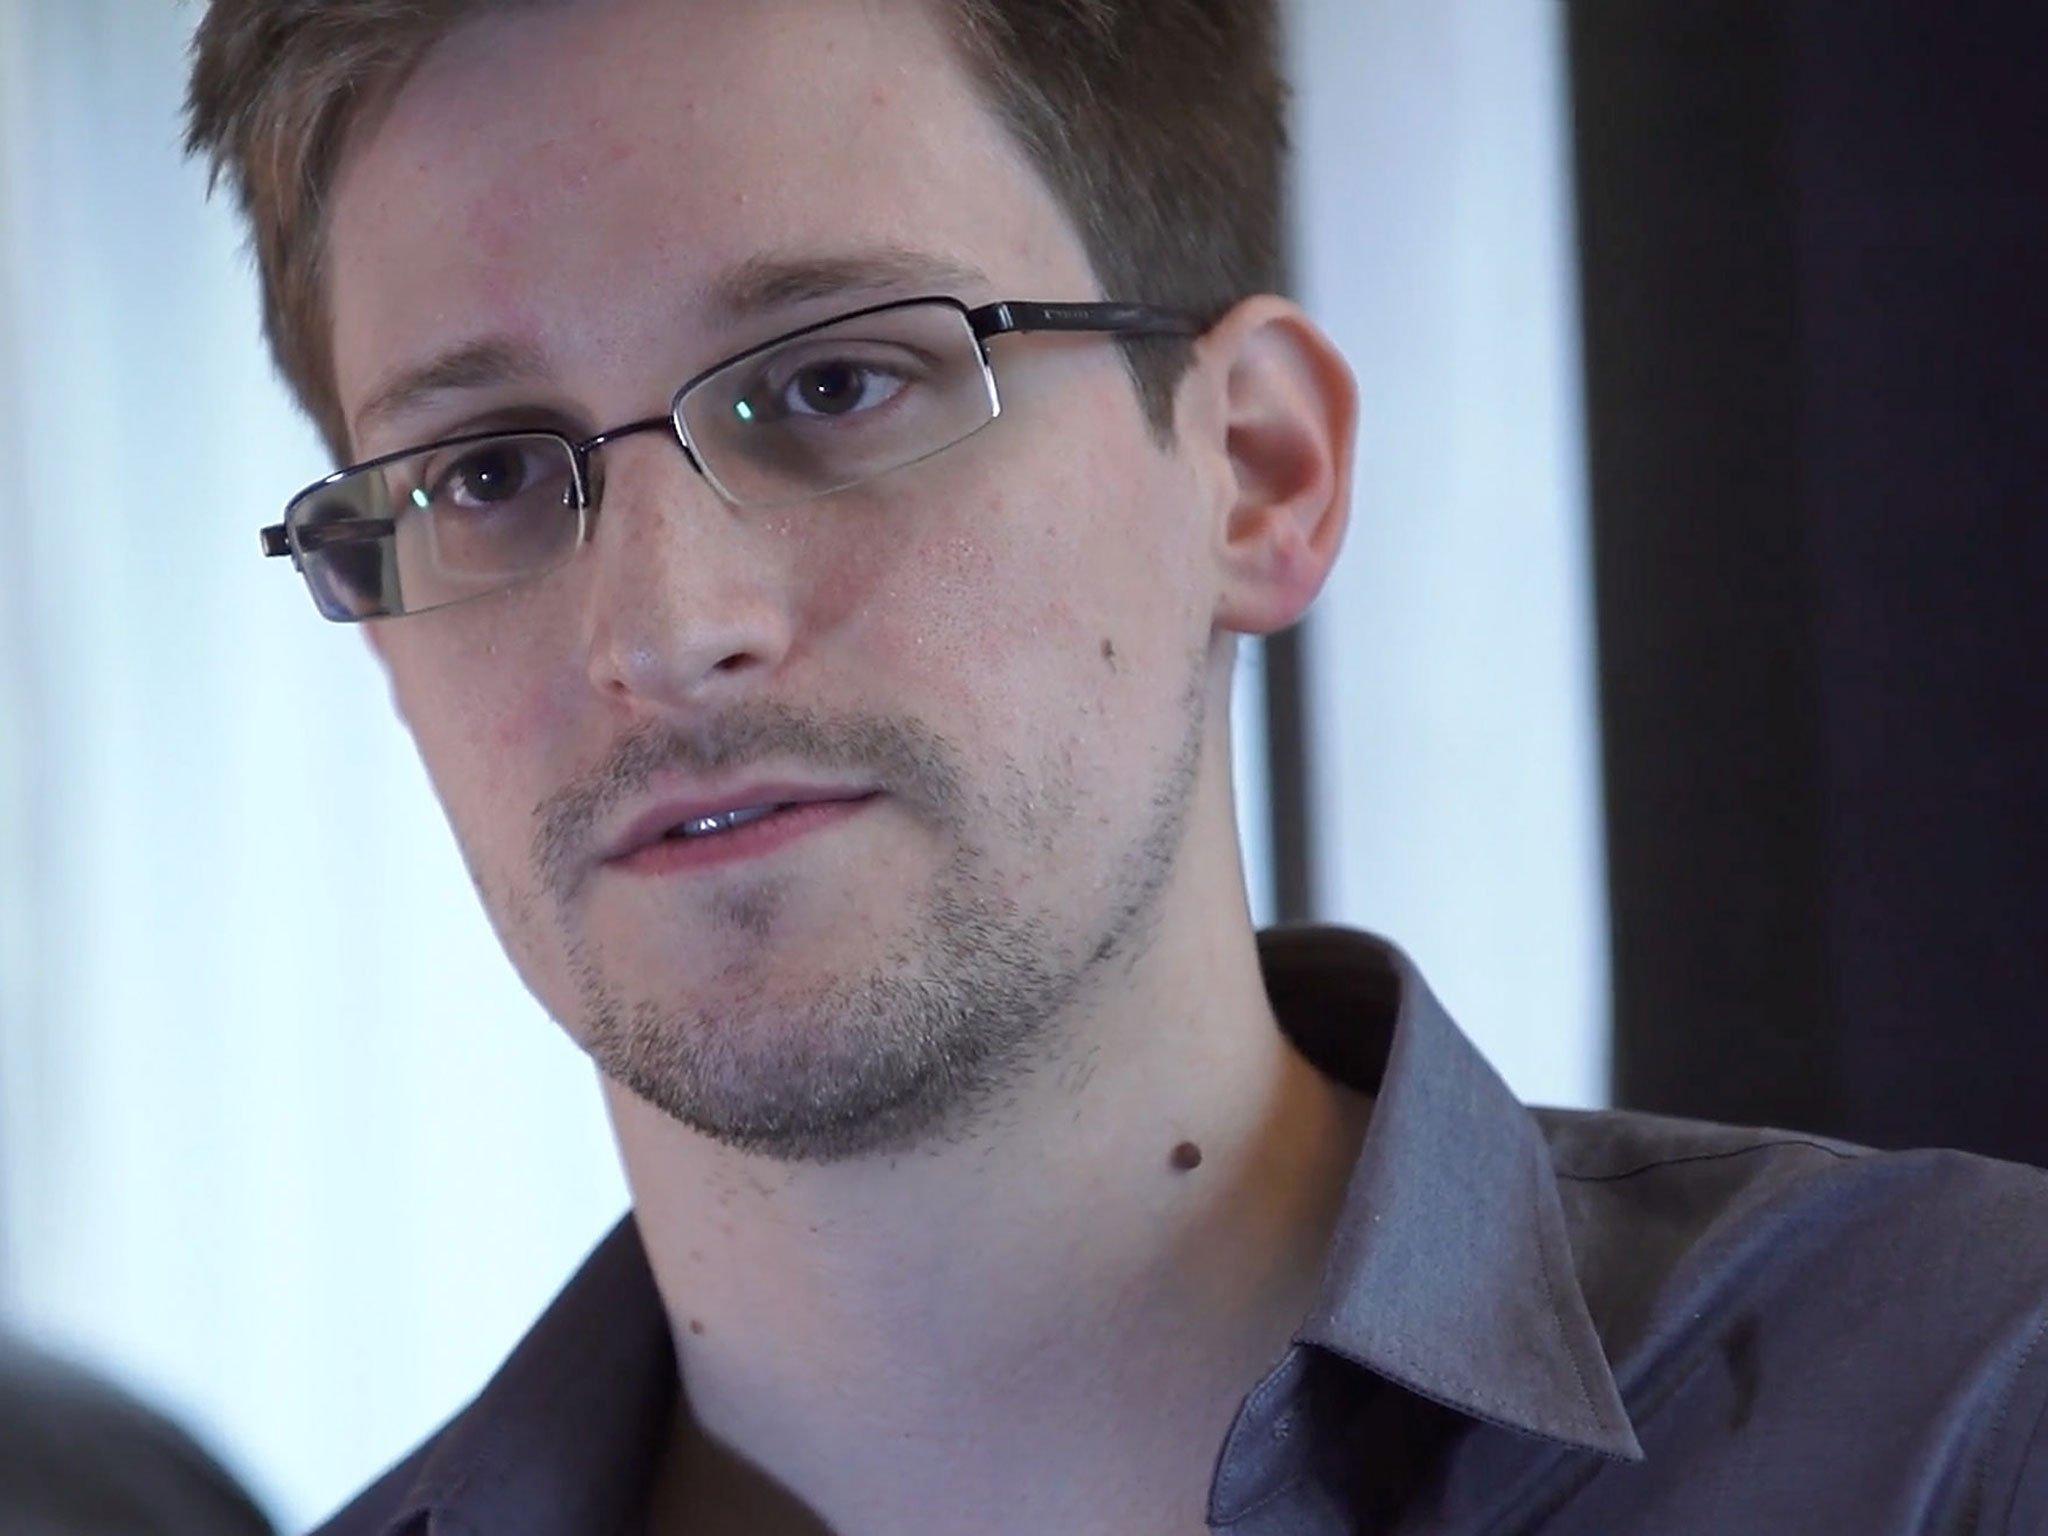 Edward Snowden: Whistleblower 'did complain to NSA' before leaking